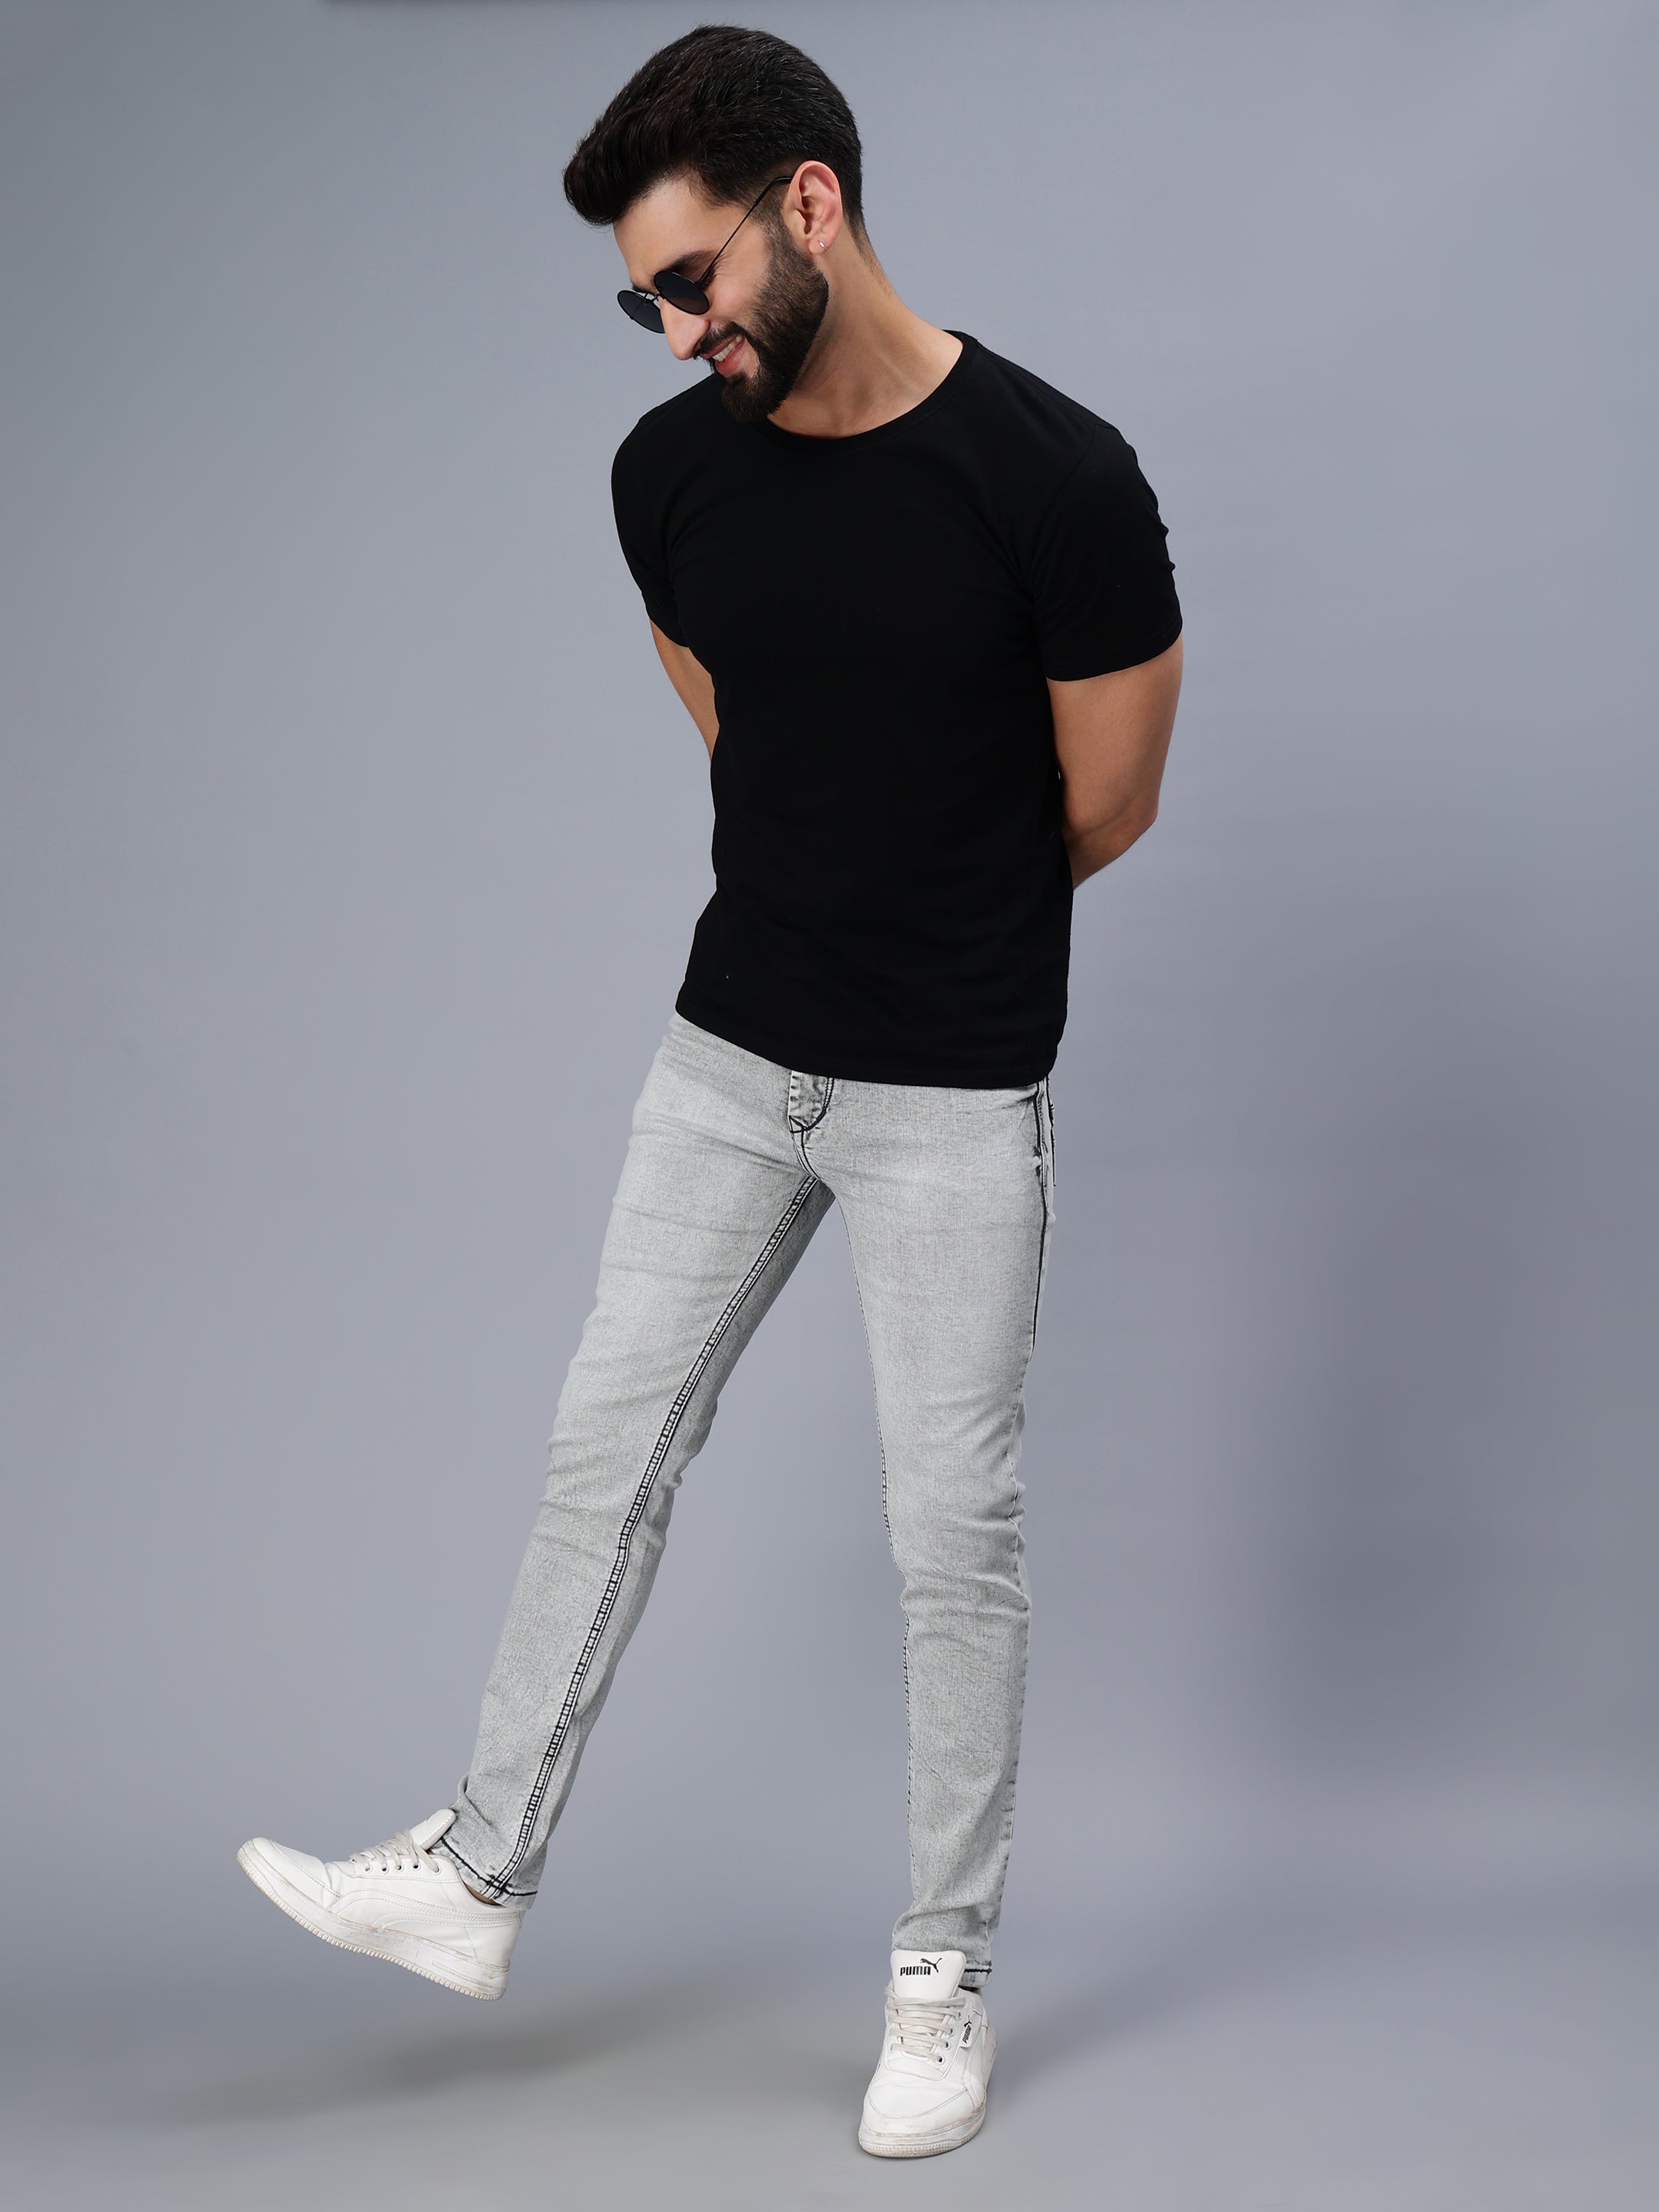 WHITE WASH GREY SKINNY FIT JEANS